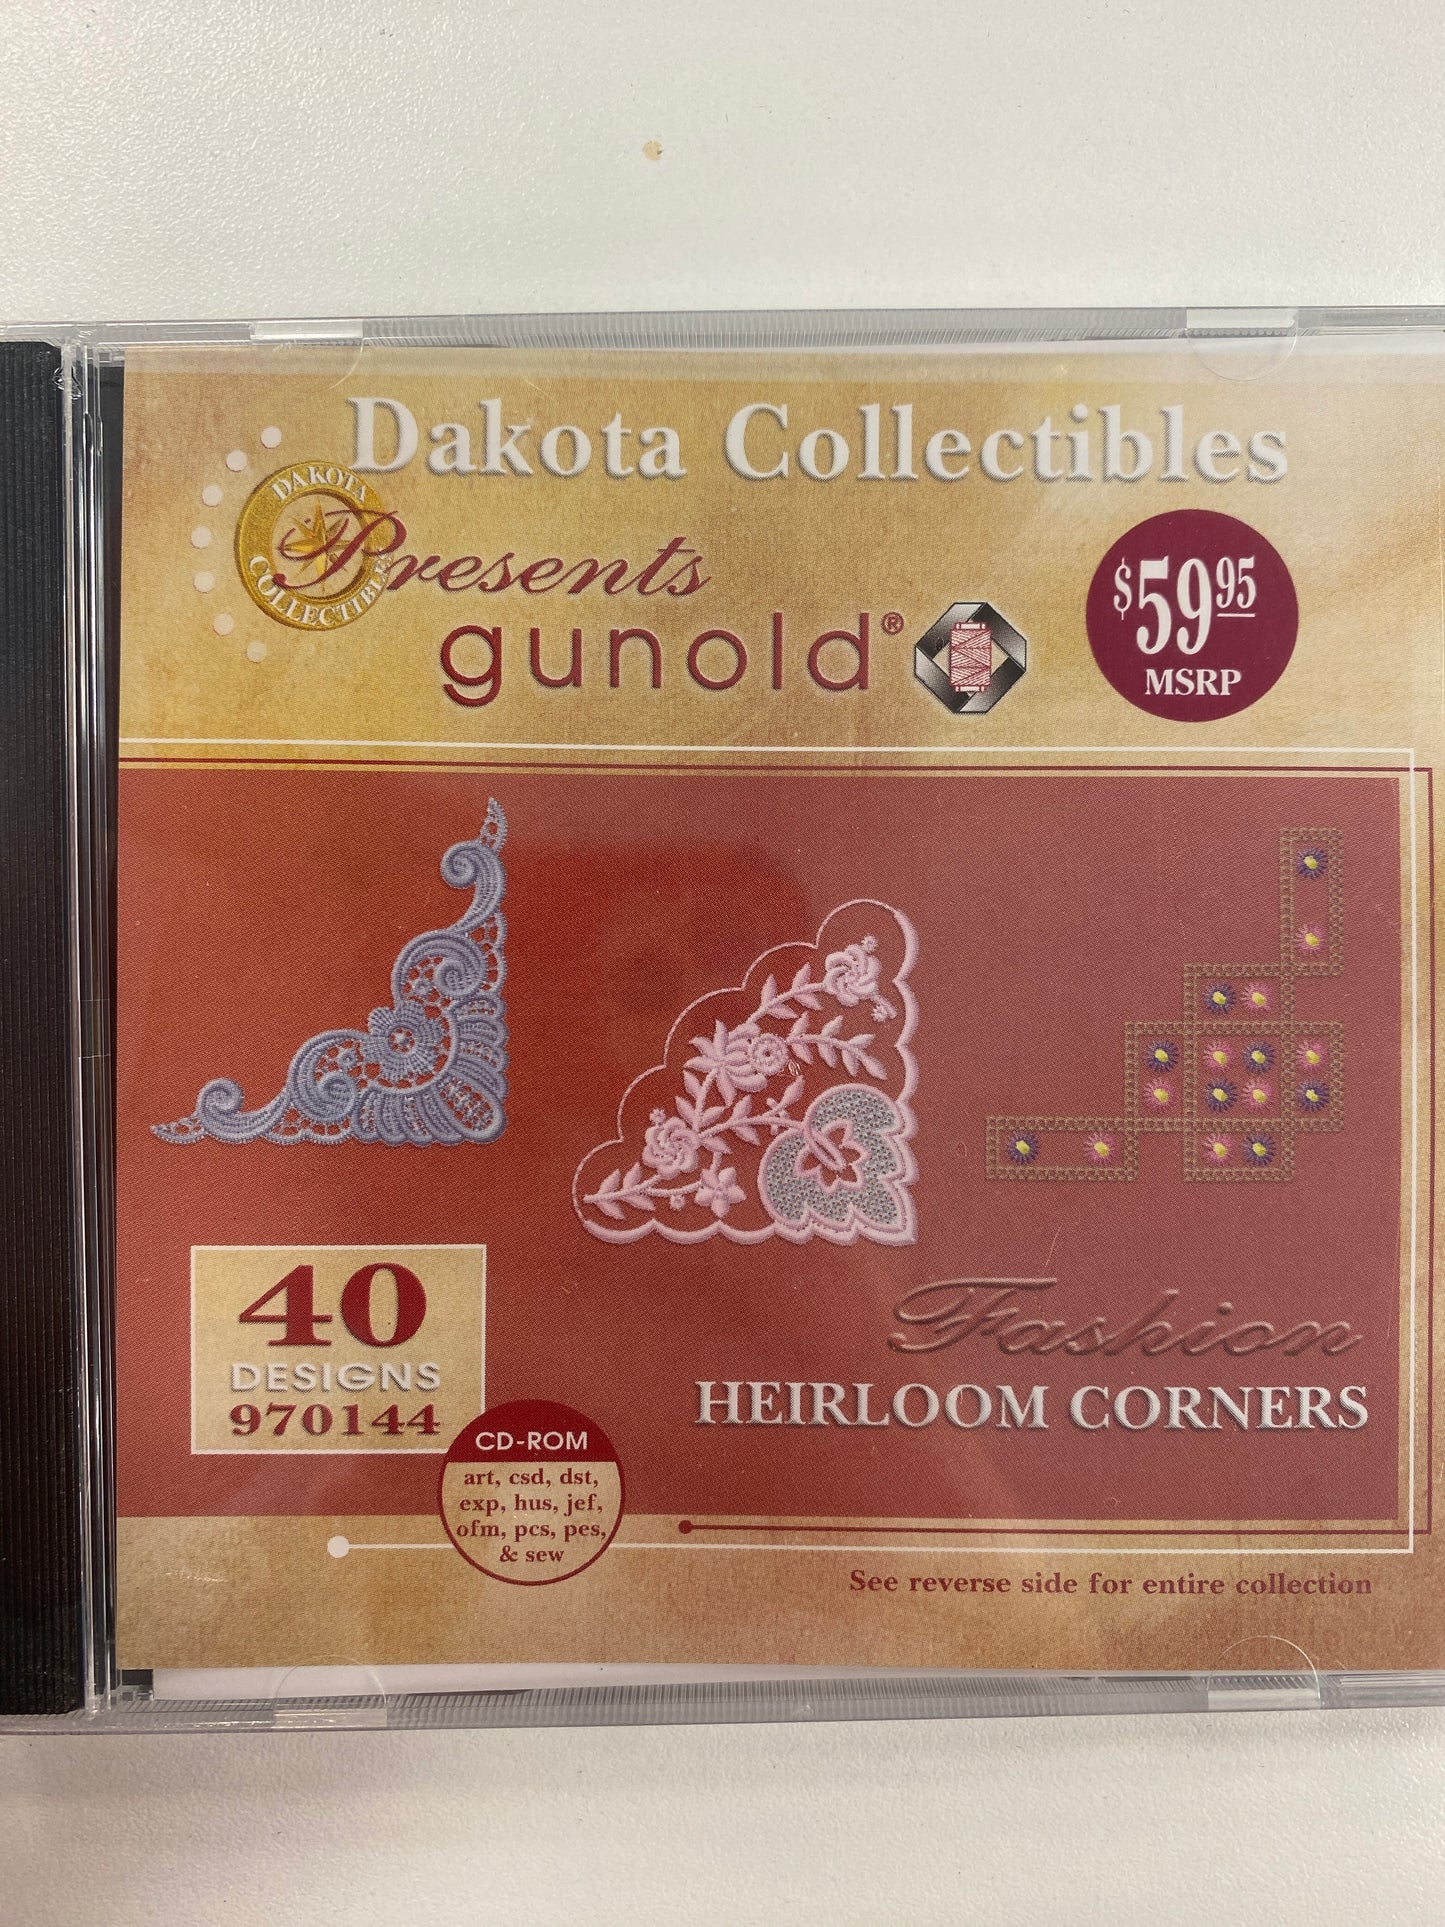 Dakota Collections- CD Embroidery Designs